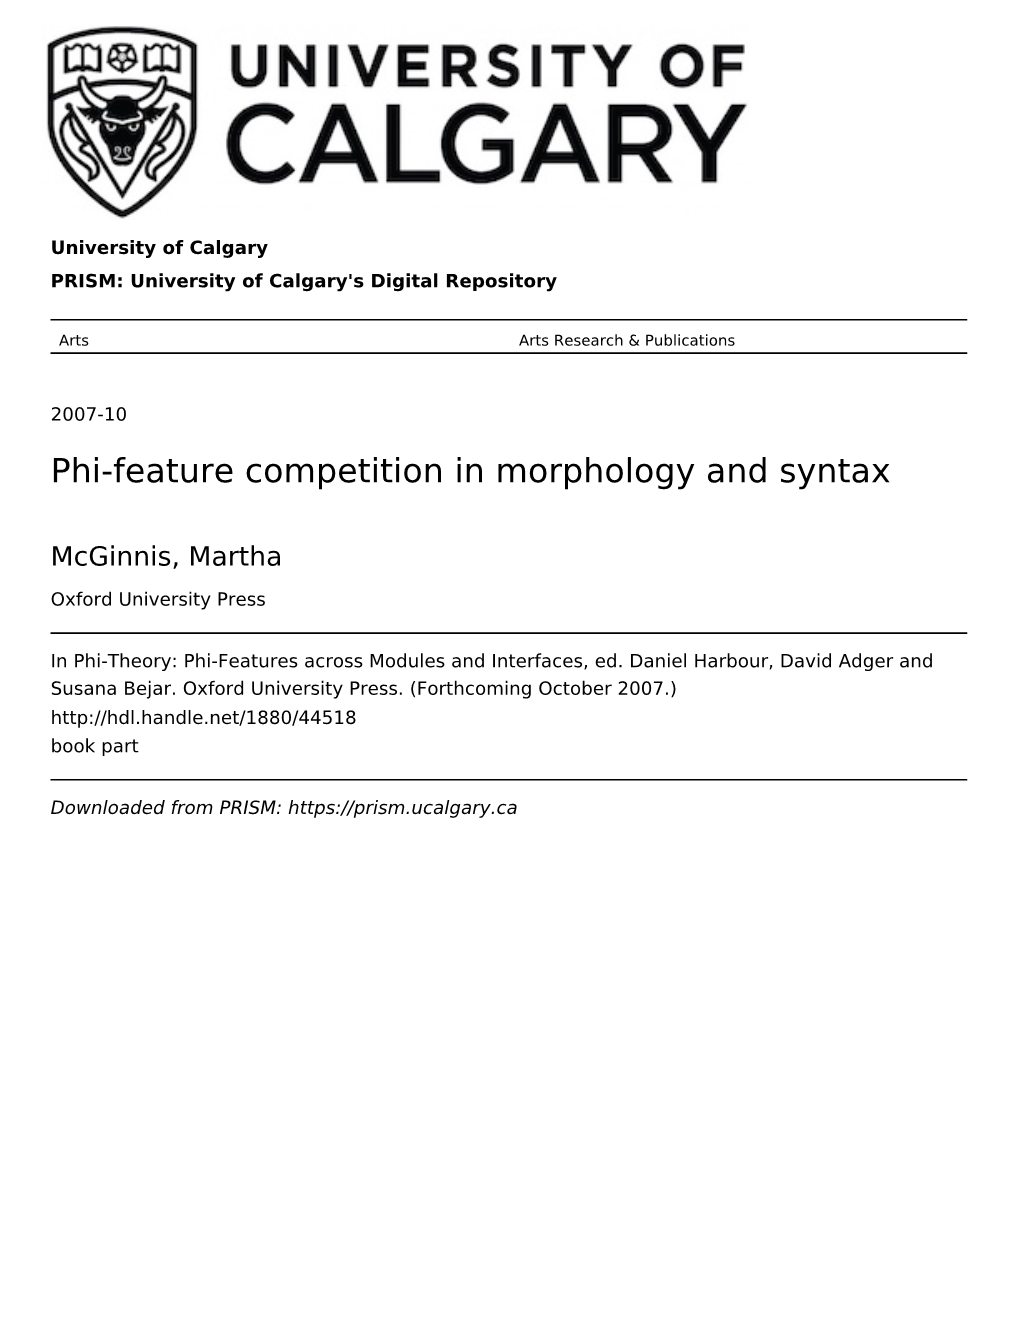 Phi-Feature Competition in Morphology and Syntax